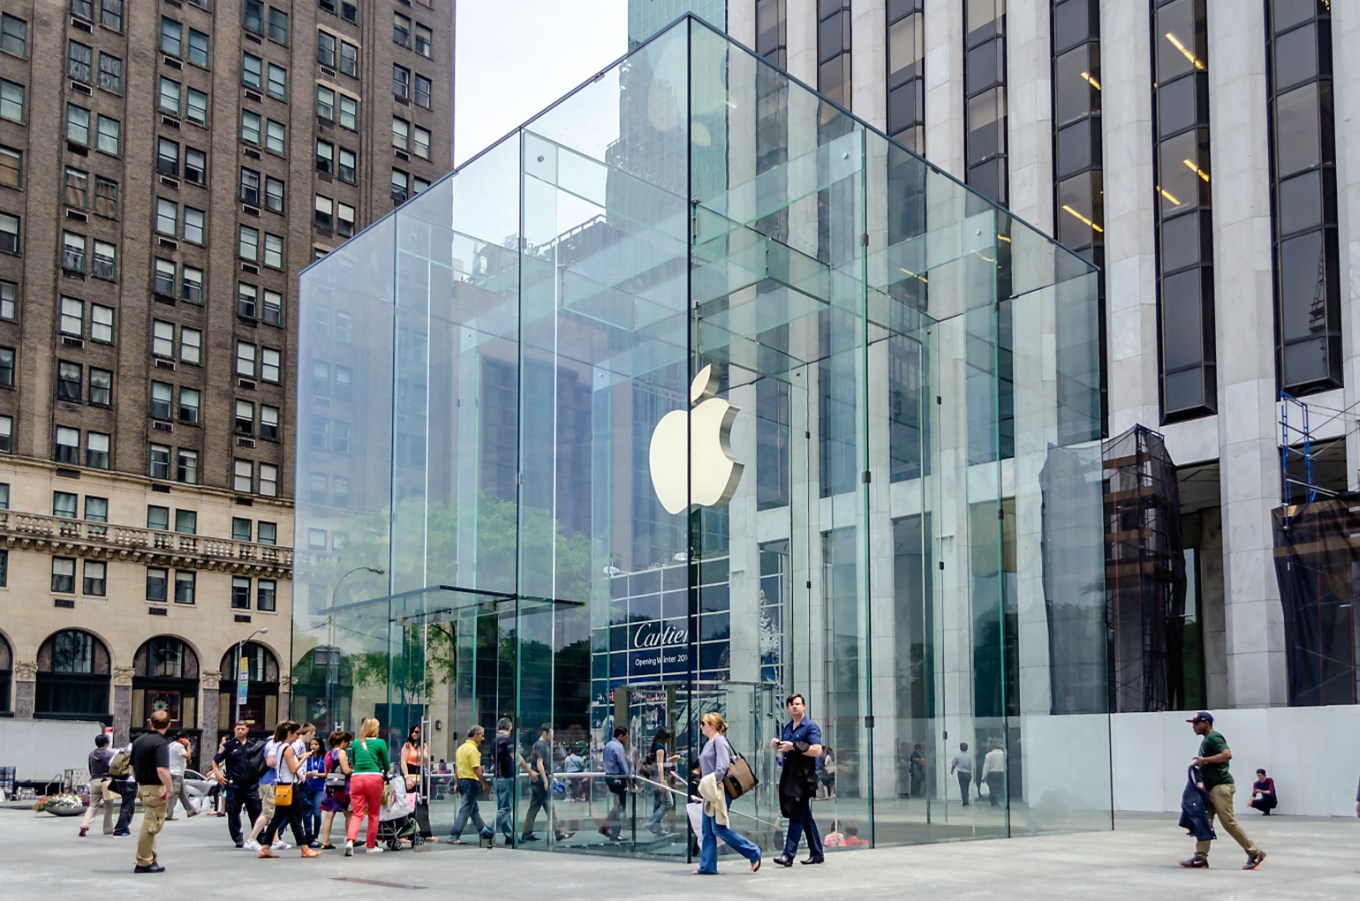 The famous Apple Store cube stands among designer brands on New York's posh 5th Avenue